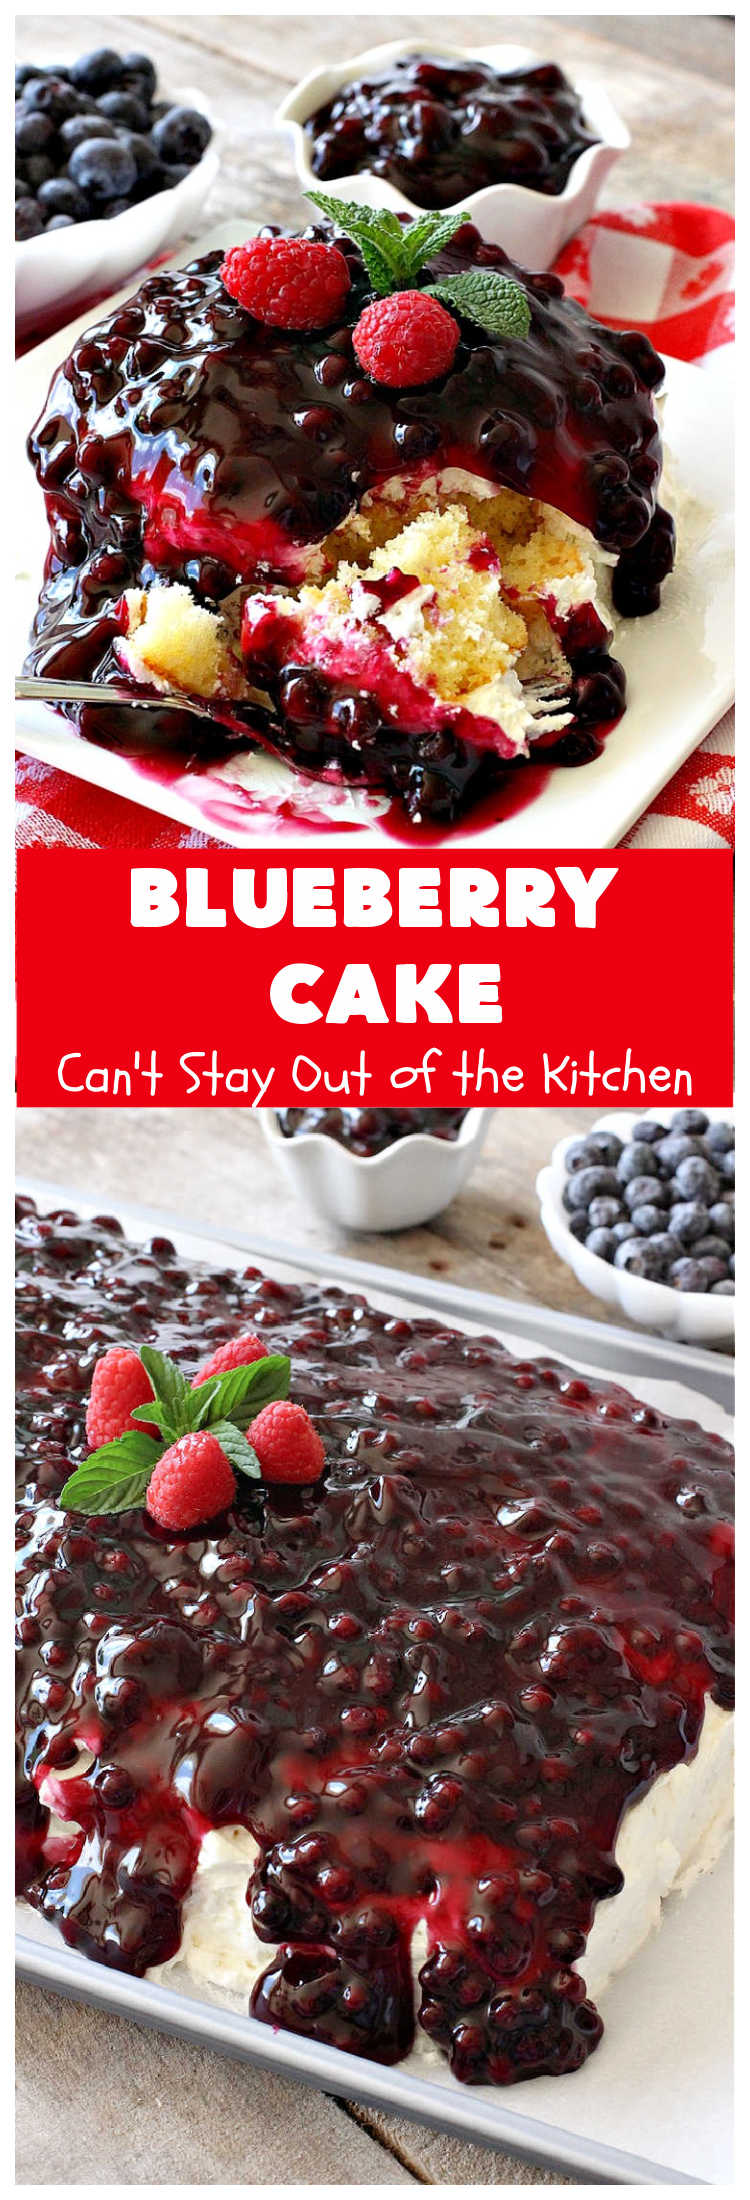 Blueberry Cake | Can't Stay Out of the Kitchen | this luscious #cake #recipe uses only 8 ingredients. It's really easy but so incredibly scrumptious. It has a #CreamCheese frosting & it's covered with #BlueberryPieFilling. Perfect for #holidays  like #MothersDay, #FathersDay, #MemorialDay or #FourthofJuly too. #dessert #blueberry #BlueberryCake